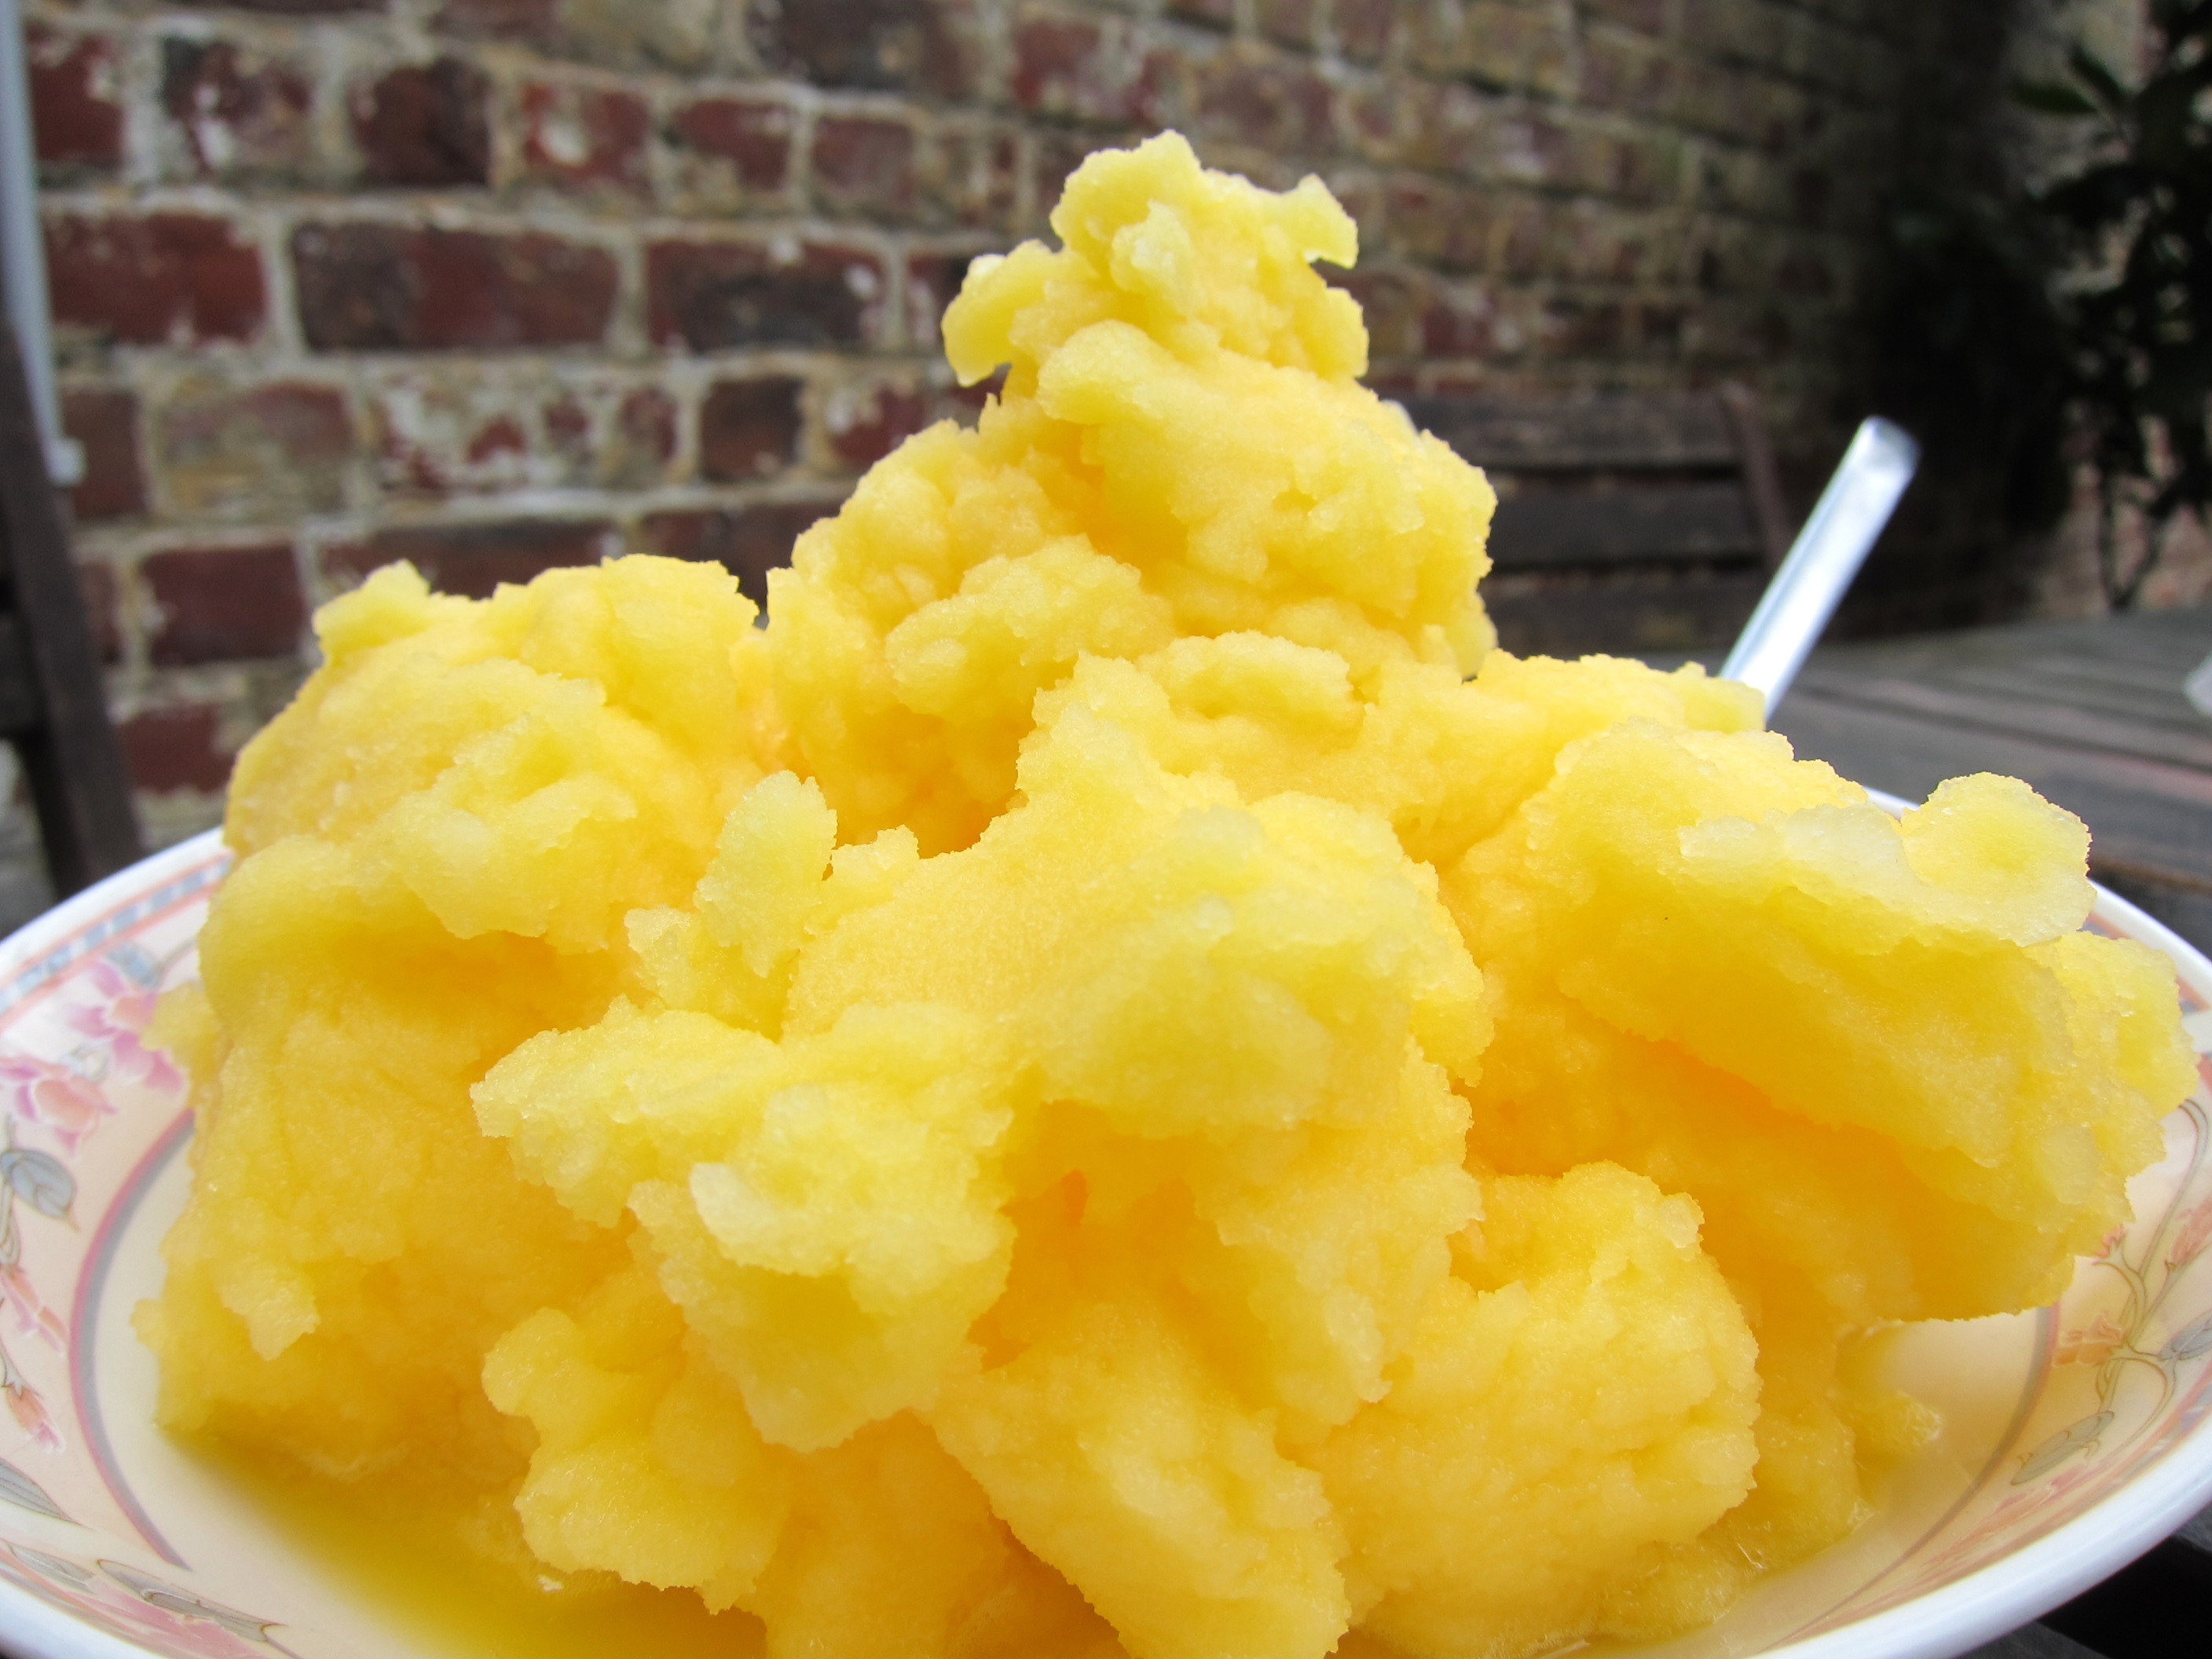 Clementine sorbet, fresh from the churning